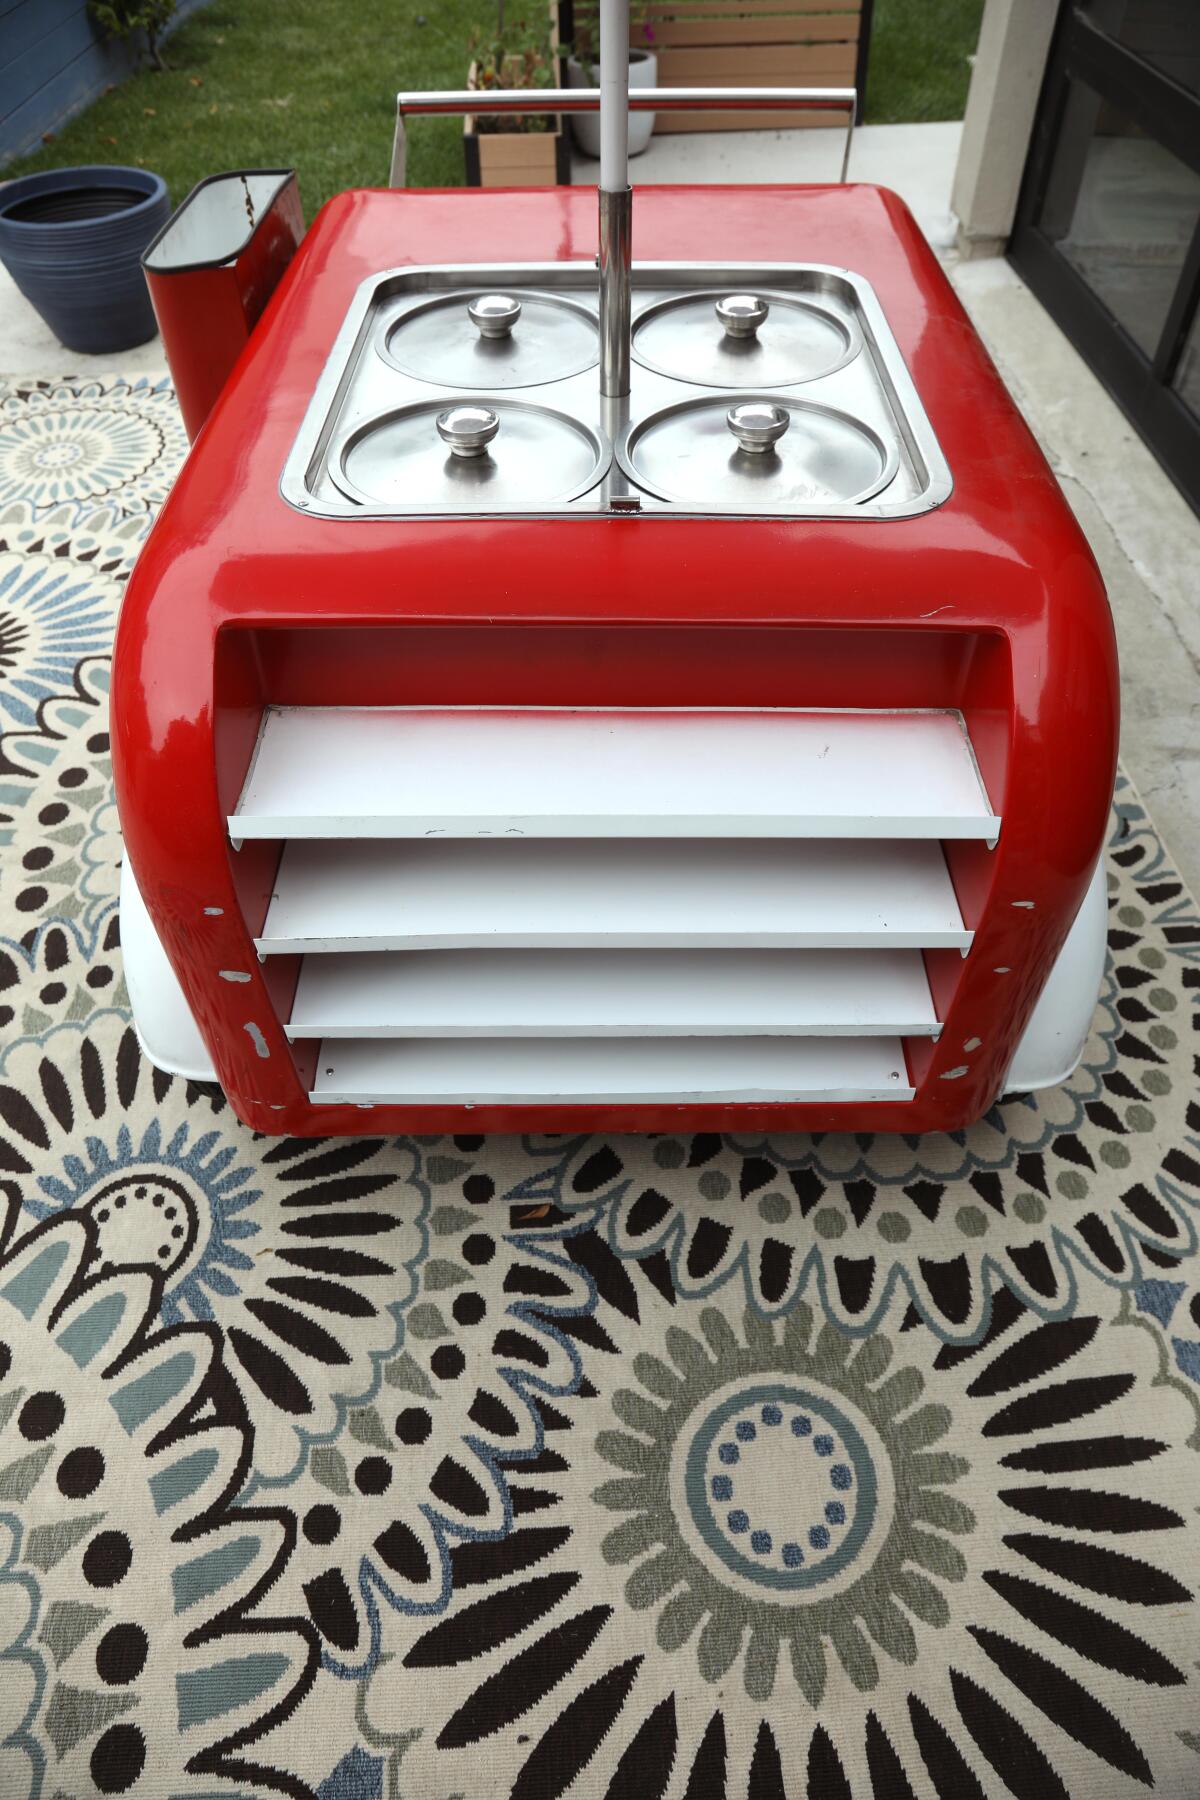 A red cart with four lids in the middle on its surface.